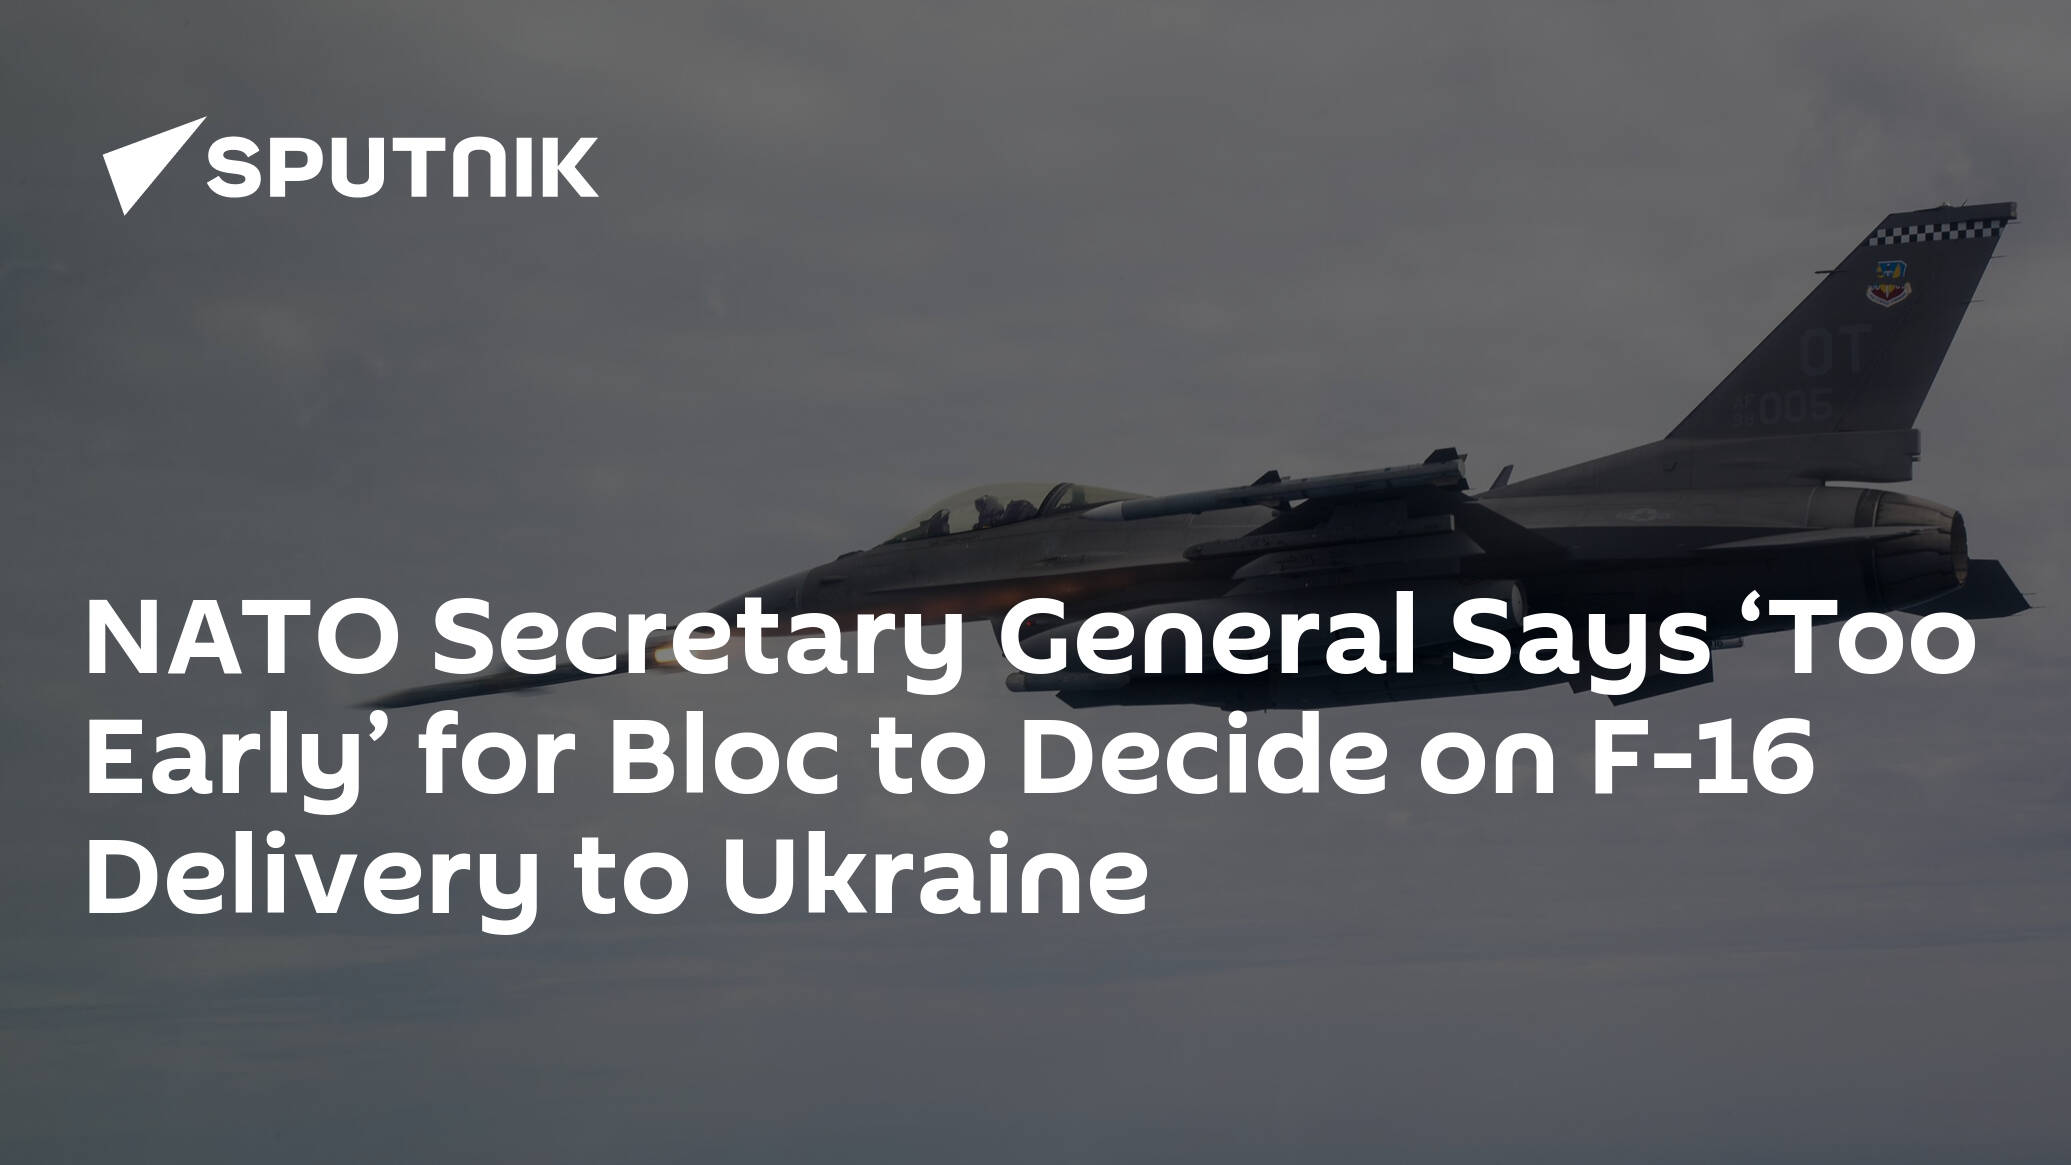 NATO Secretary General Says ‘Too Early’ for Bloc to Decide on F-16 Delivery to Ukraine